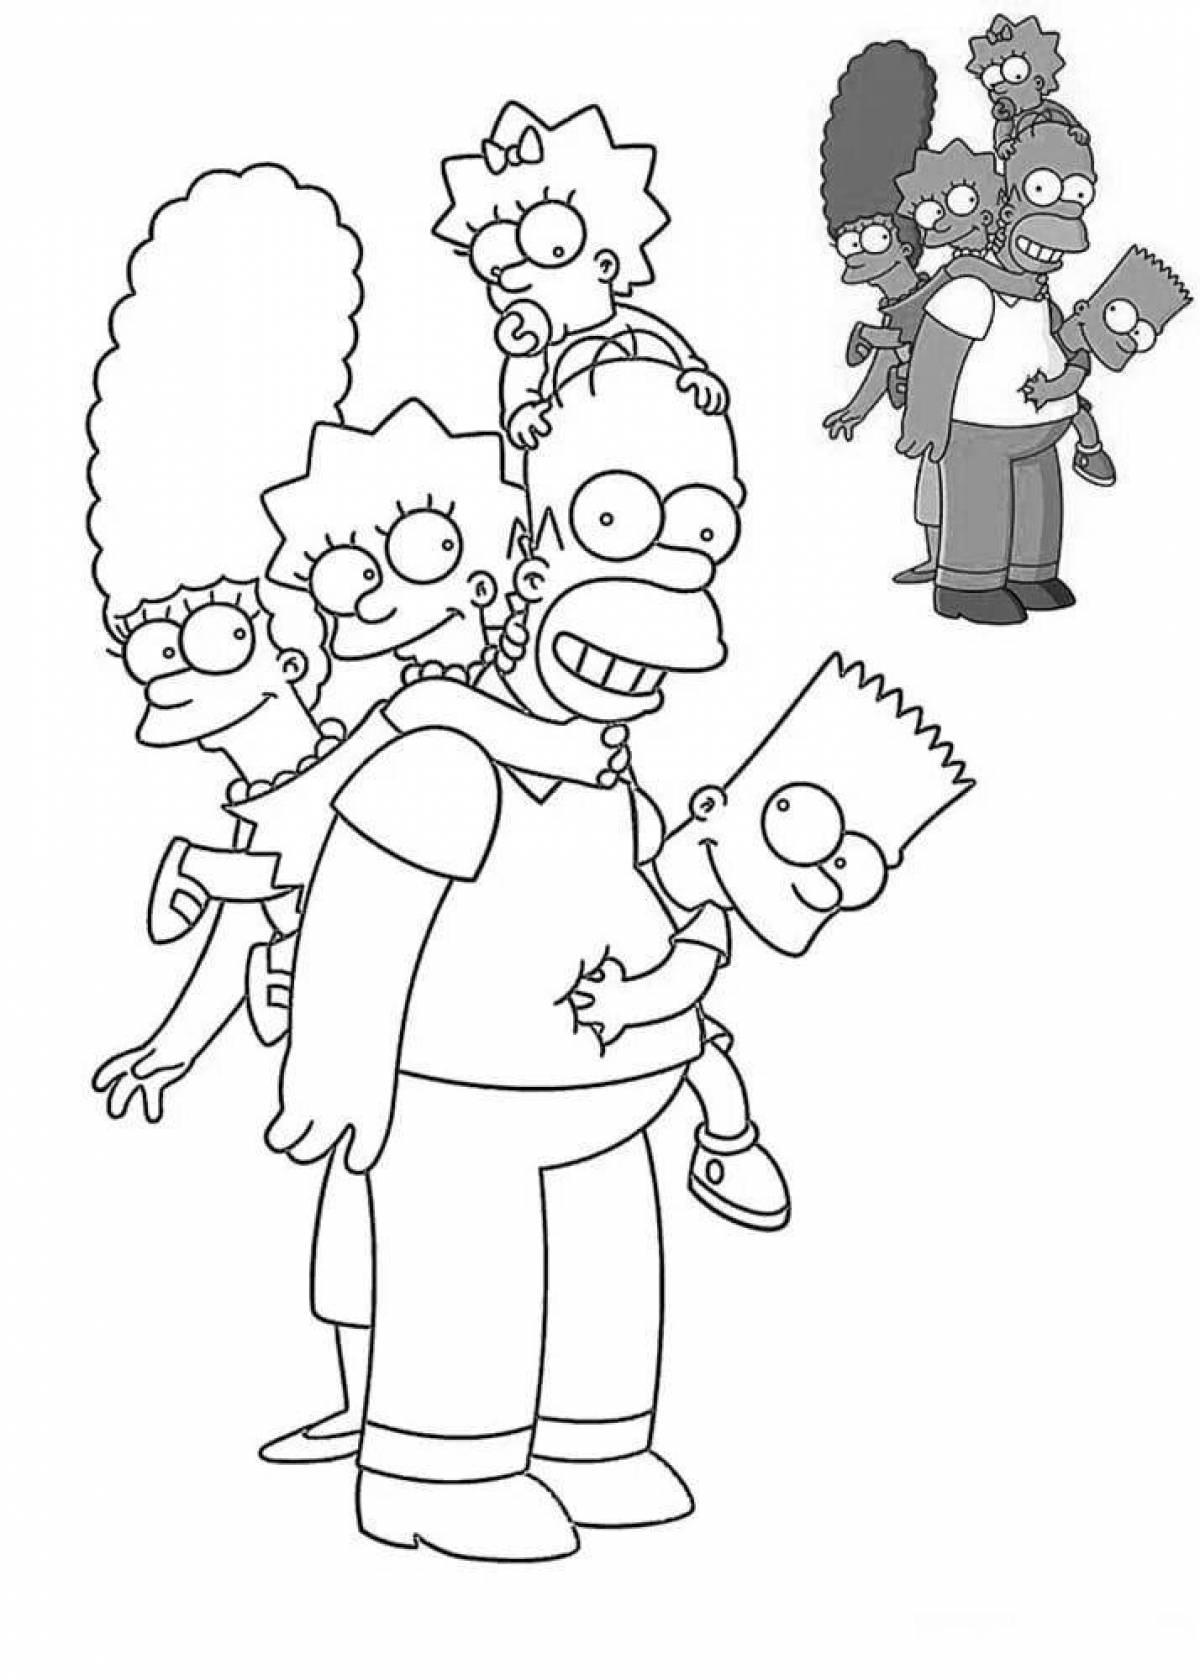 By numbers the simpsons #2